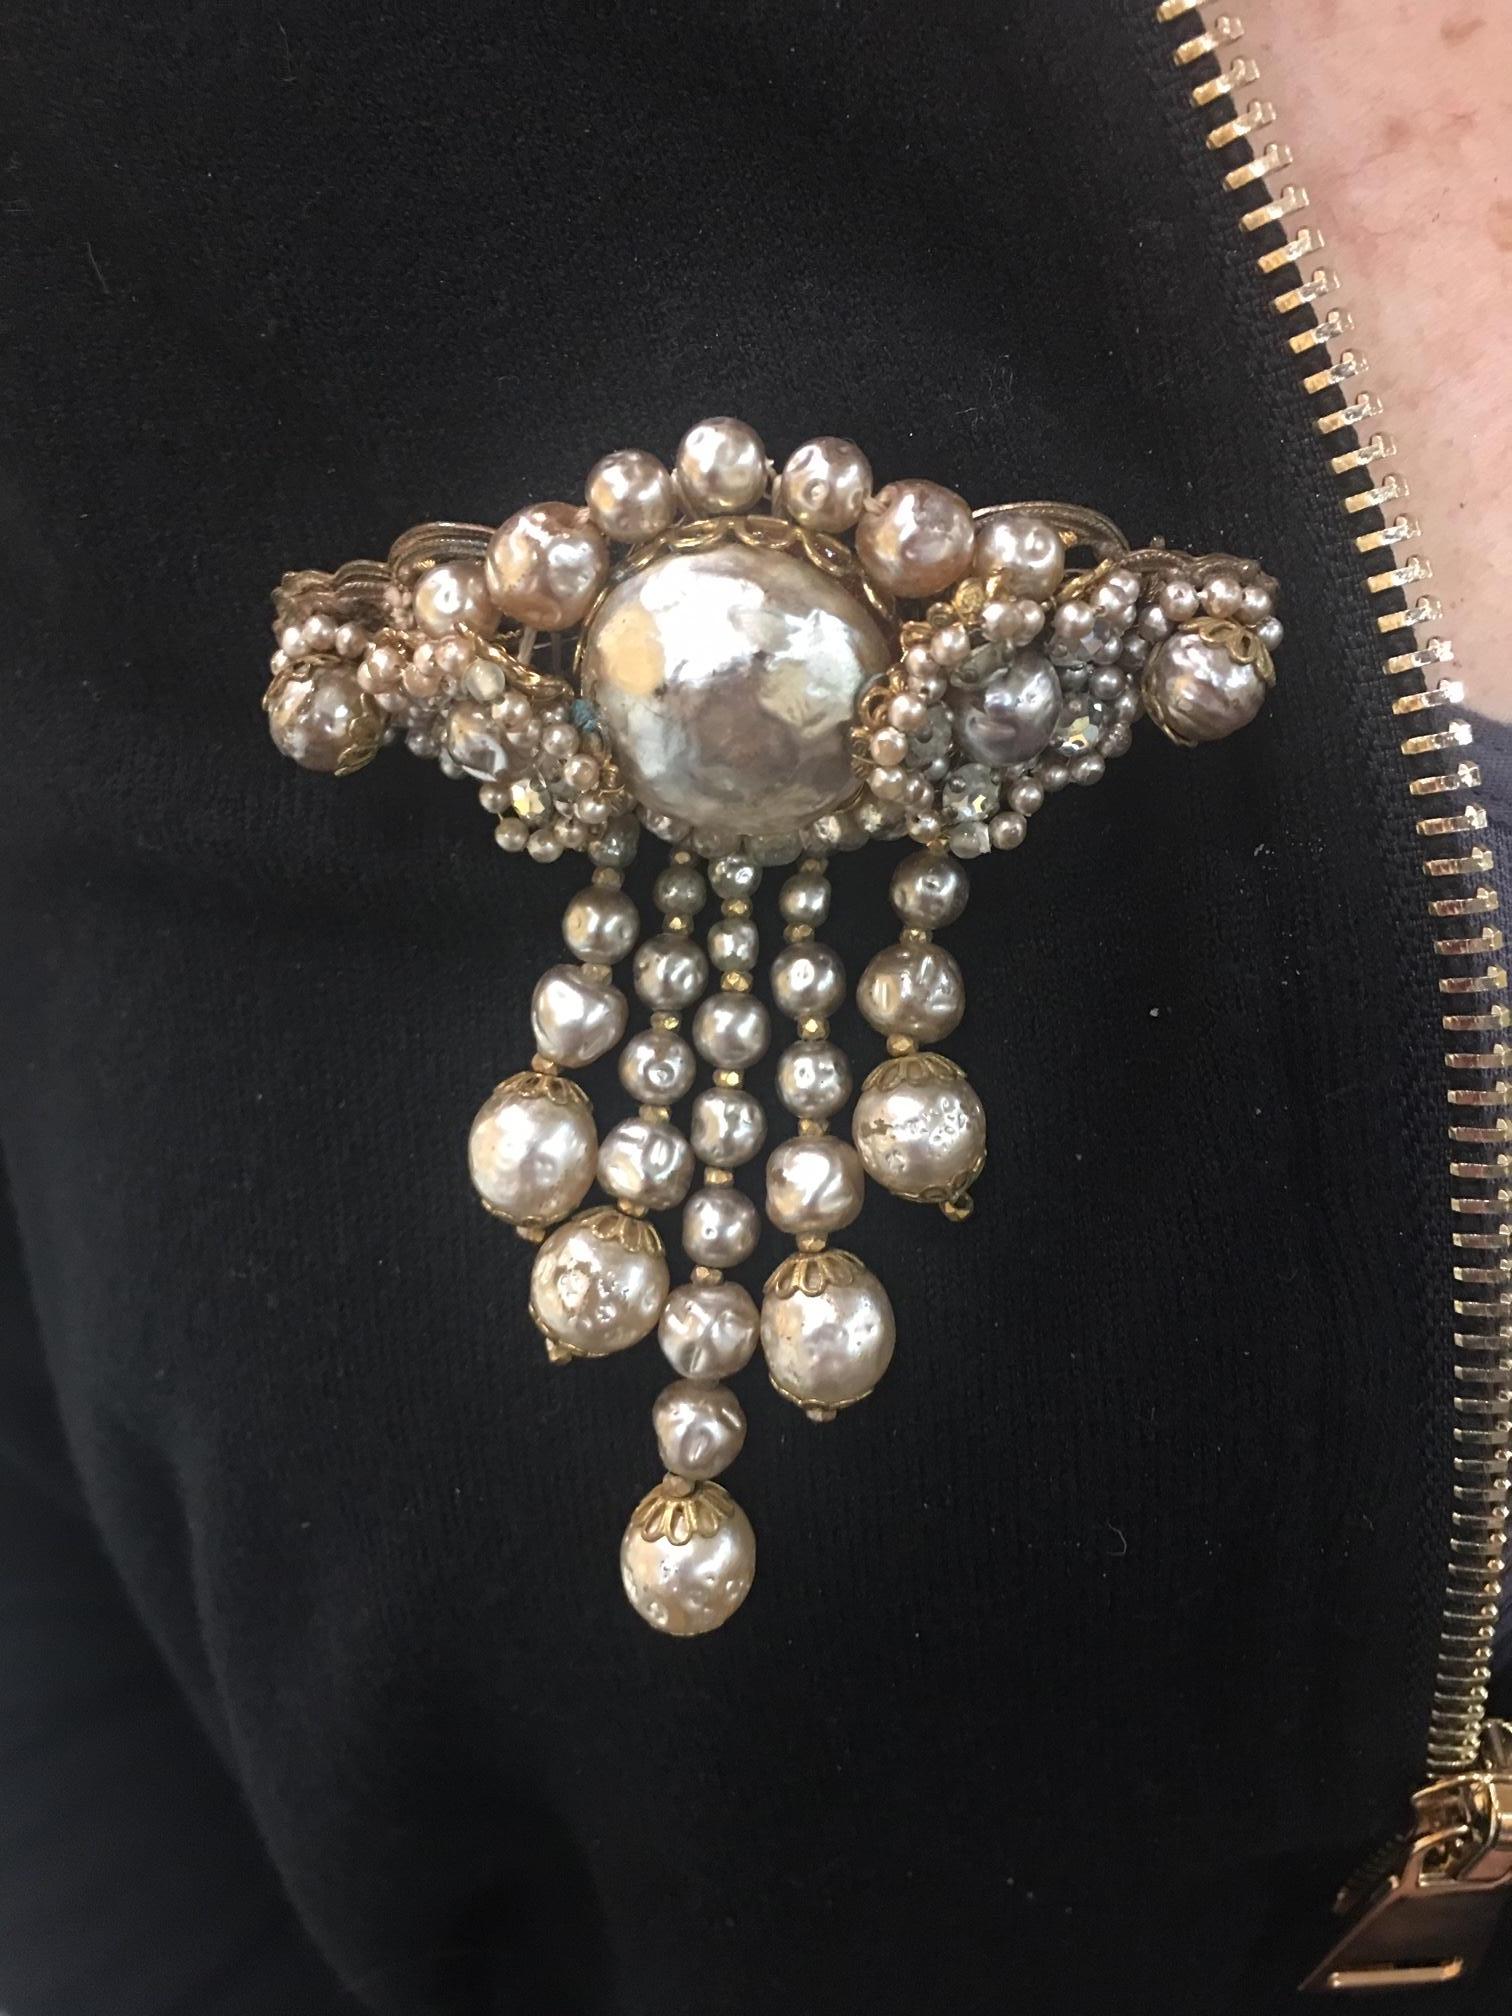 Exquisite Antique Miriam Haskell Dangle Brooch centering a Large Faux Pearl, surrounded by clusters of embroidered seed pearls, rhinestones and smaller Faux Pearls terminating in an oval design, suspending 5 strands of dangling graduated Faux